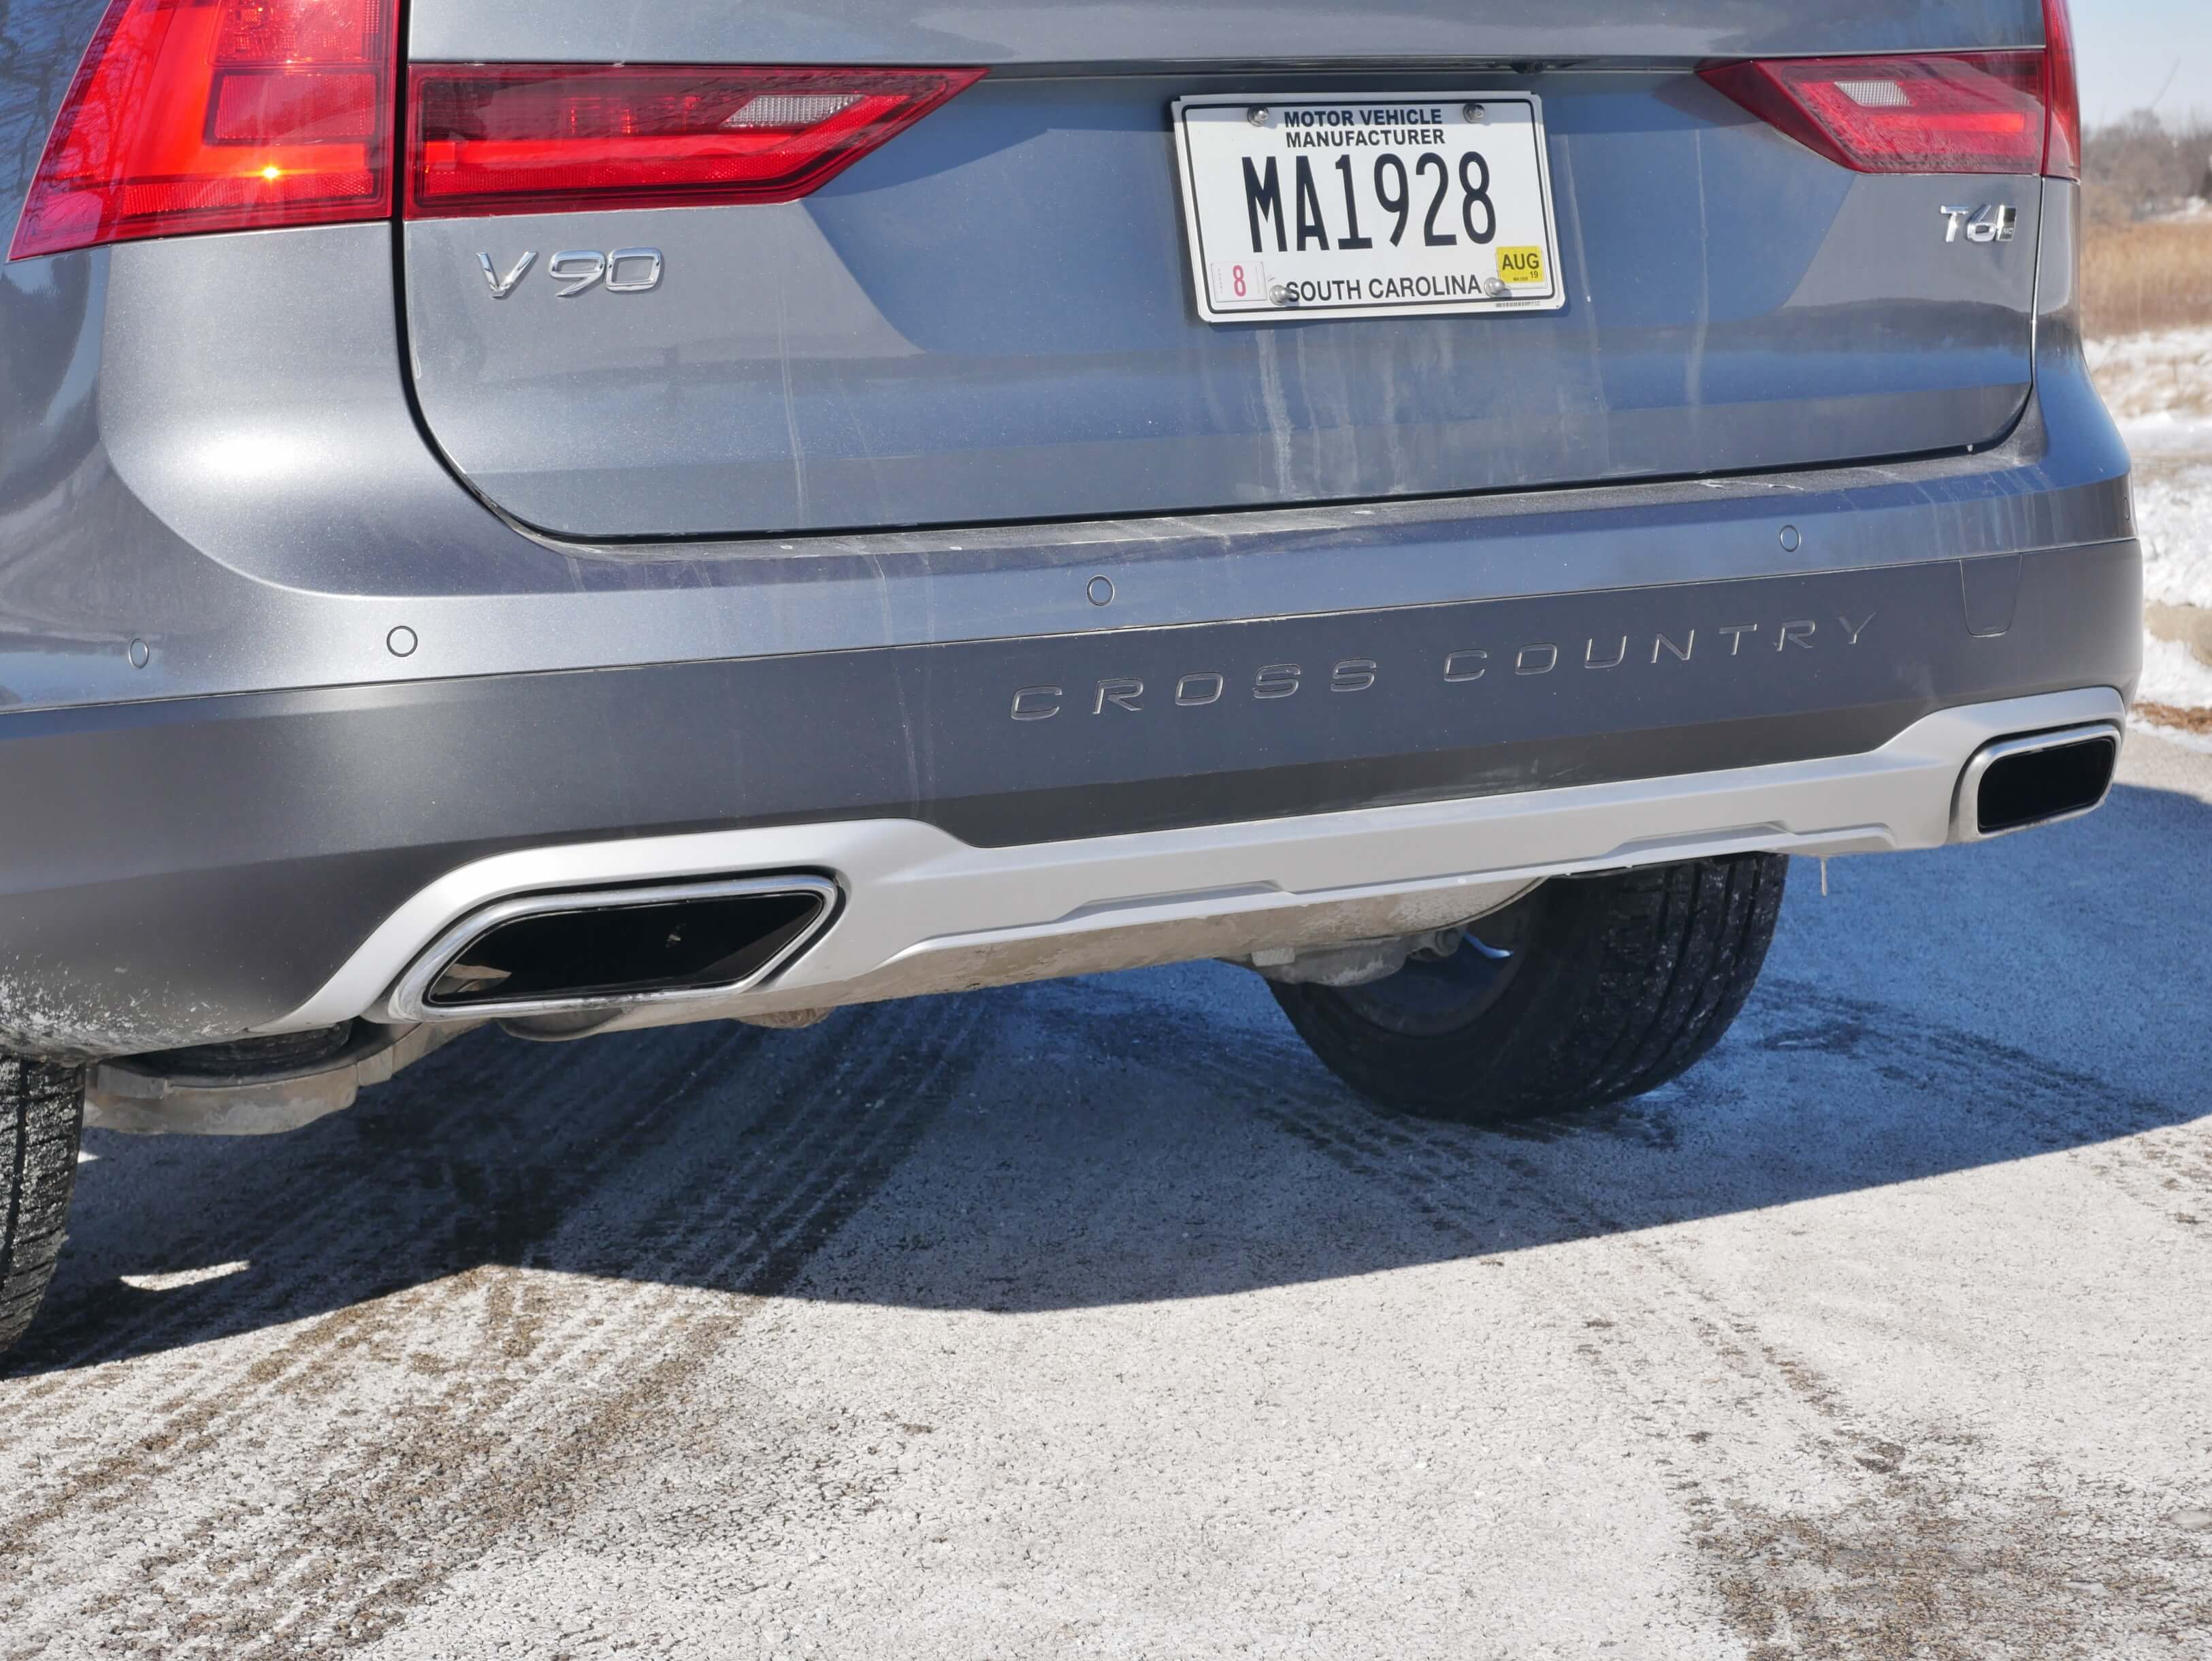 2018 Volvo V90 Cross Country T6: Dual exhaust tips integrated into simulated rear lower skid plate